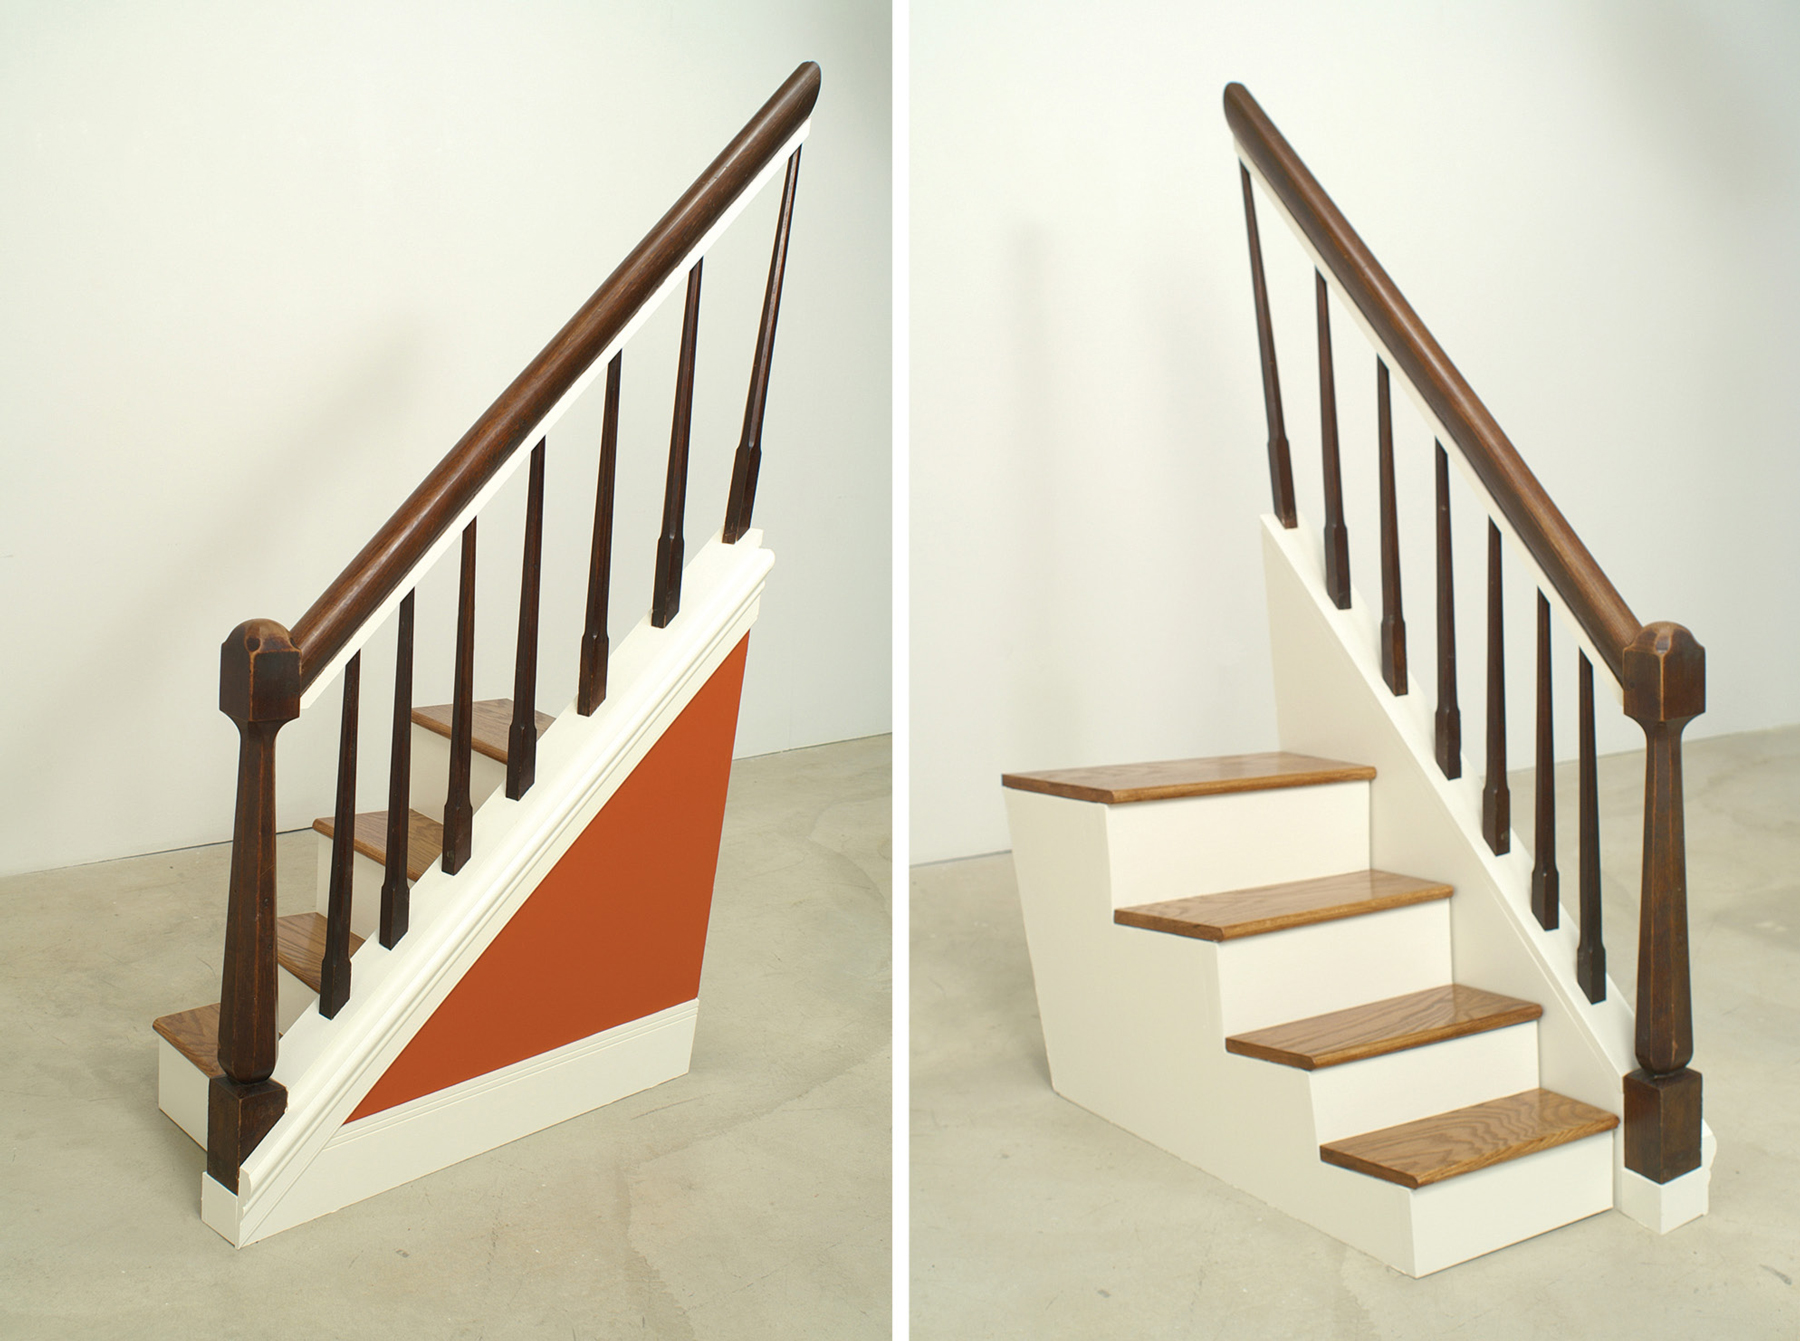 Untitled (Staircase), 2005. Found railing and post, wood, house paint; 30’ x 29” x 58”. Courtesy of the artist.